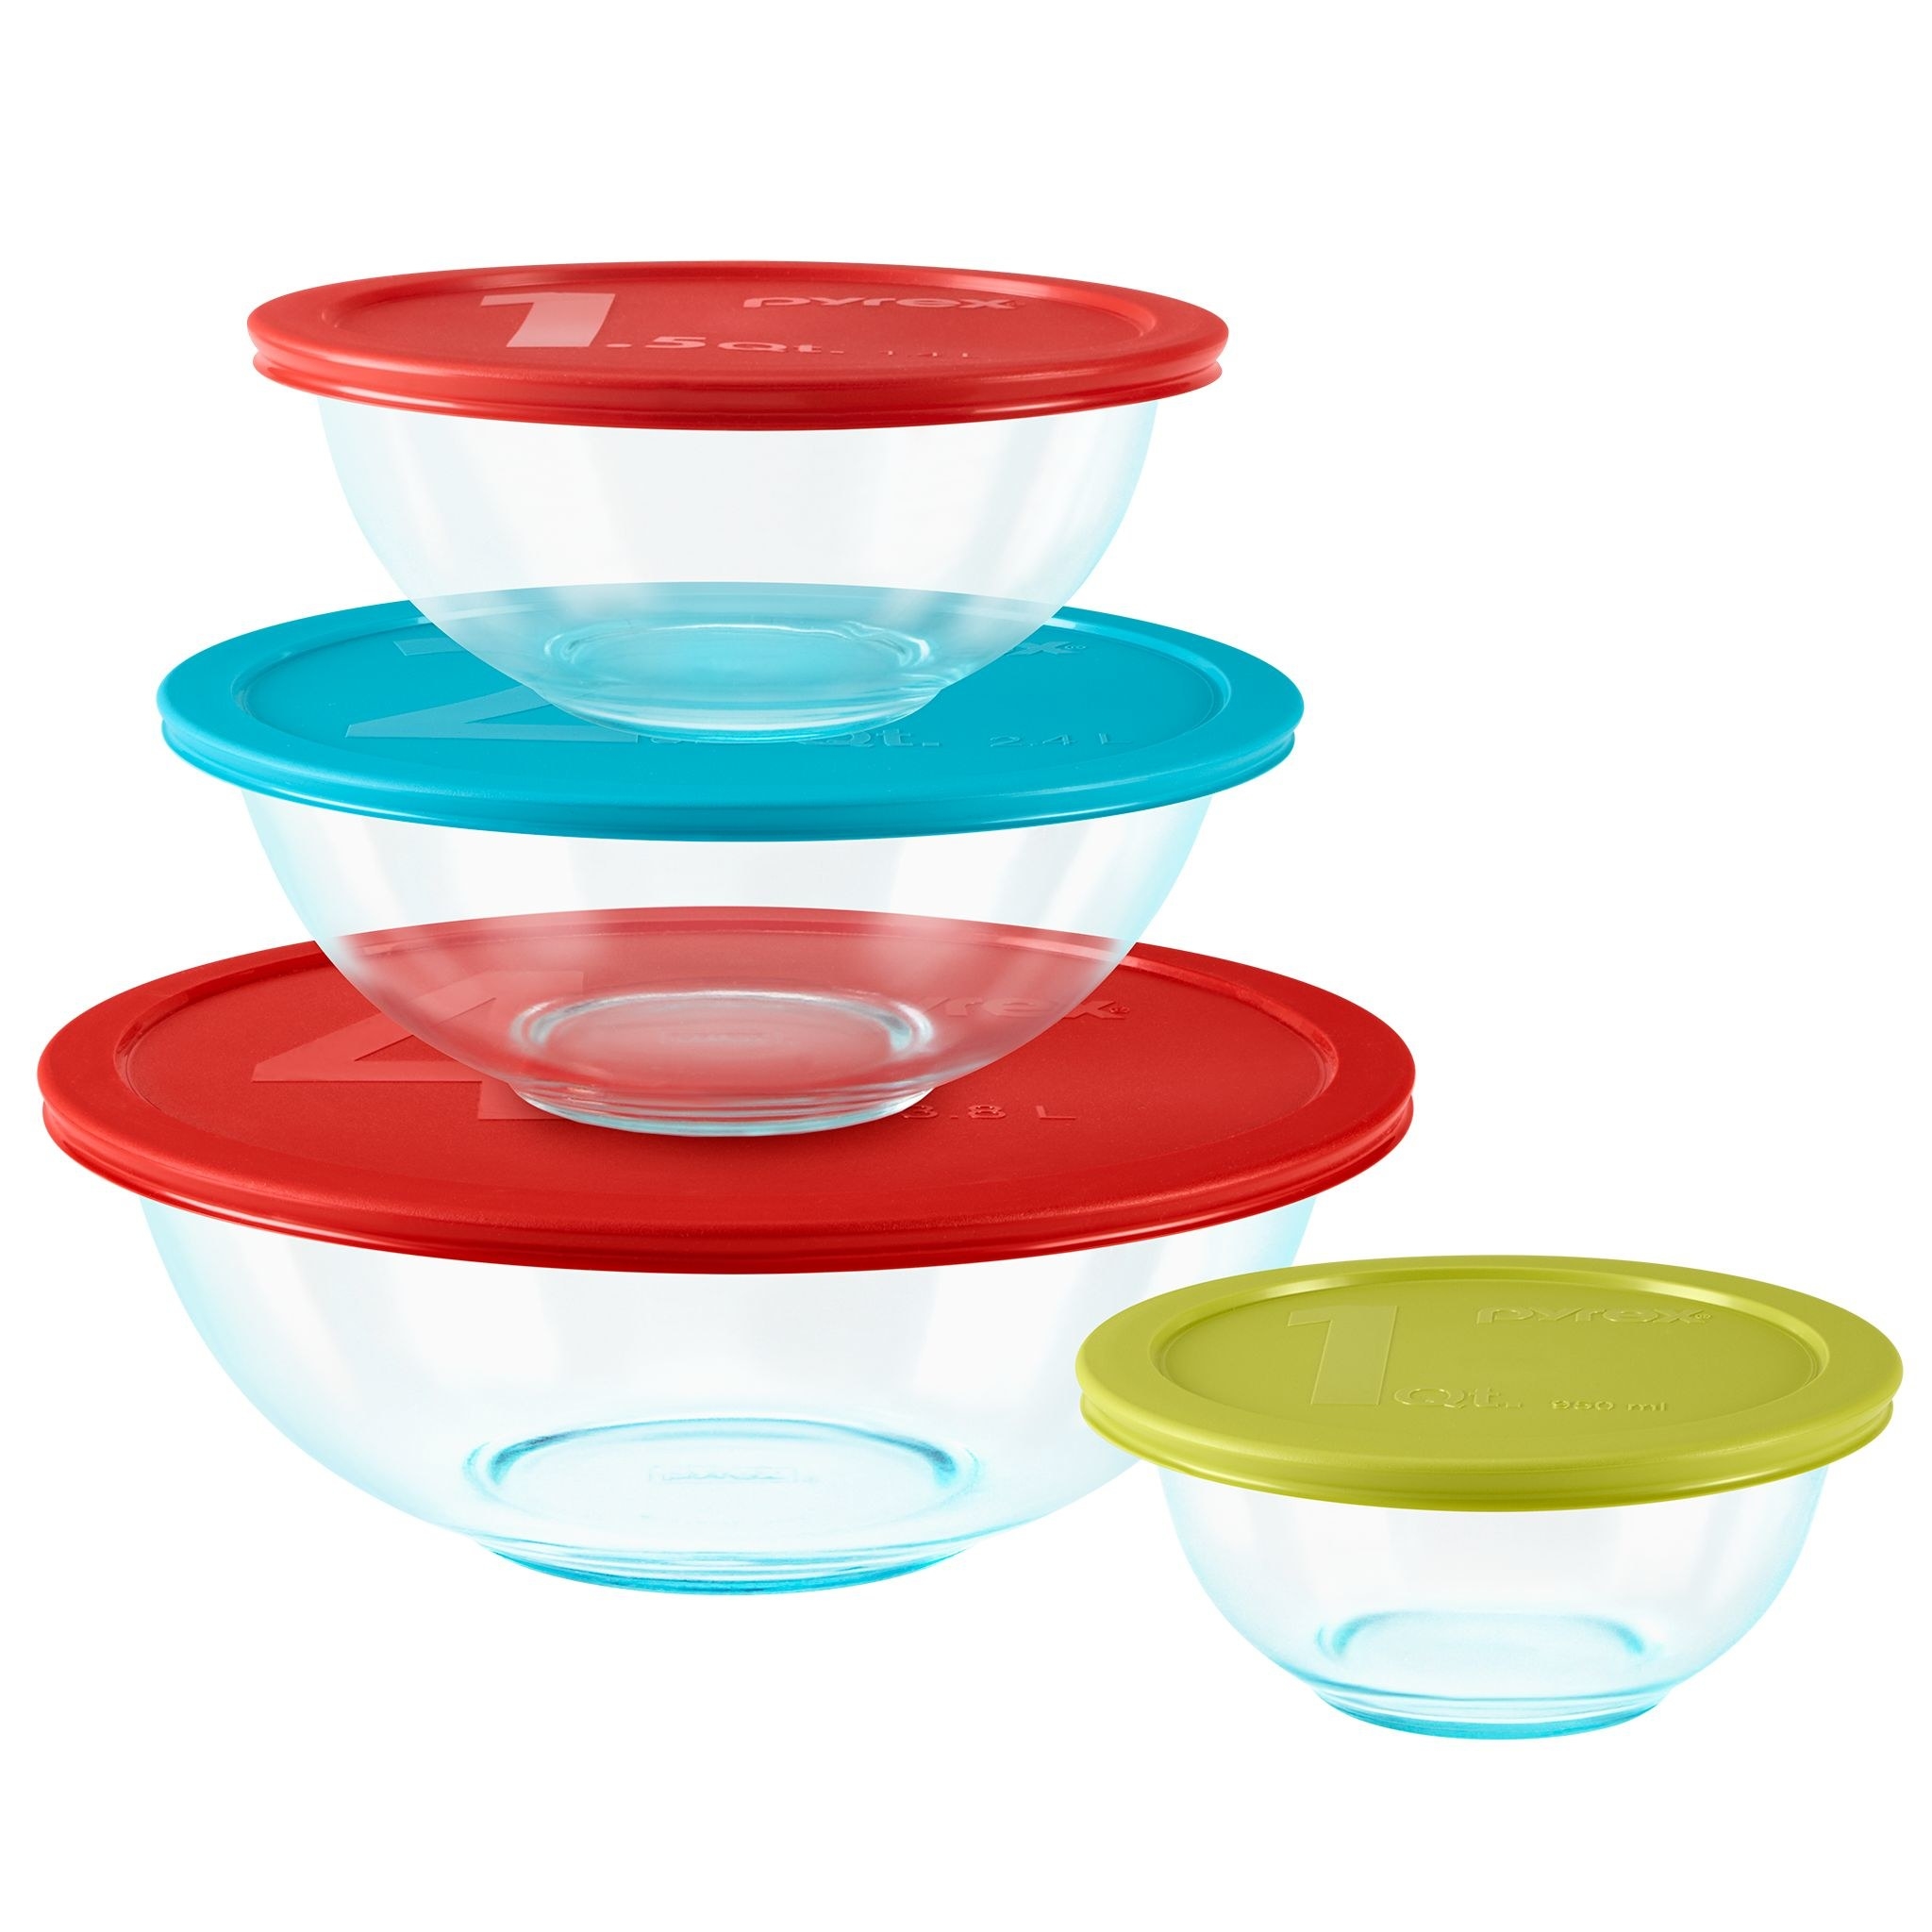 The glass bowls with colorful lids